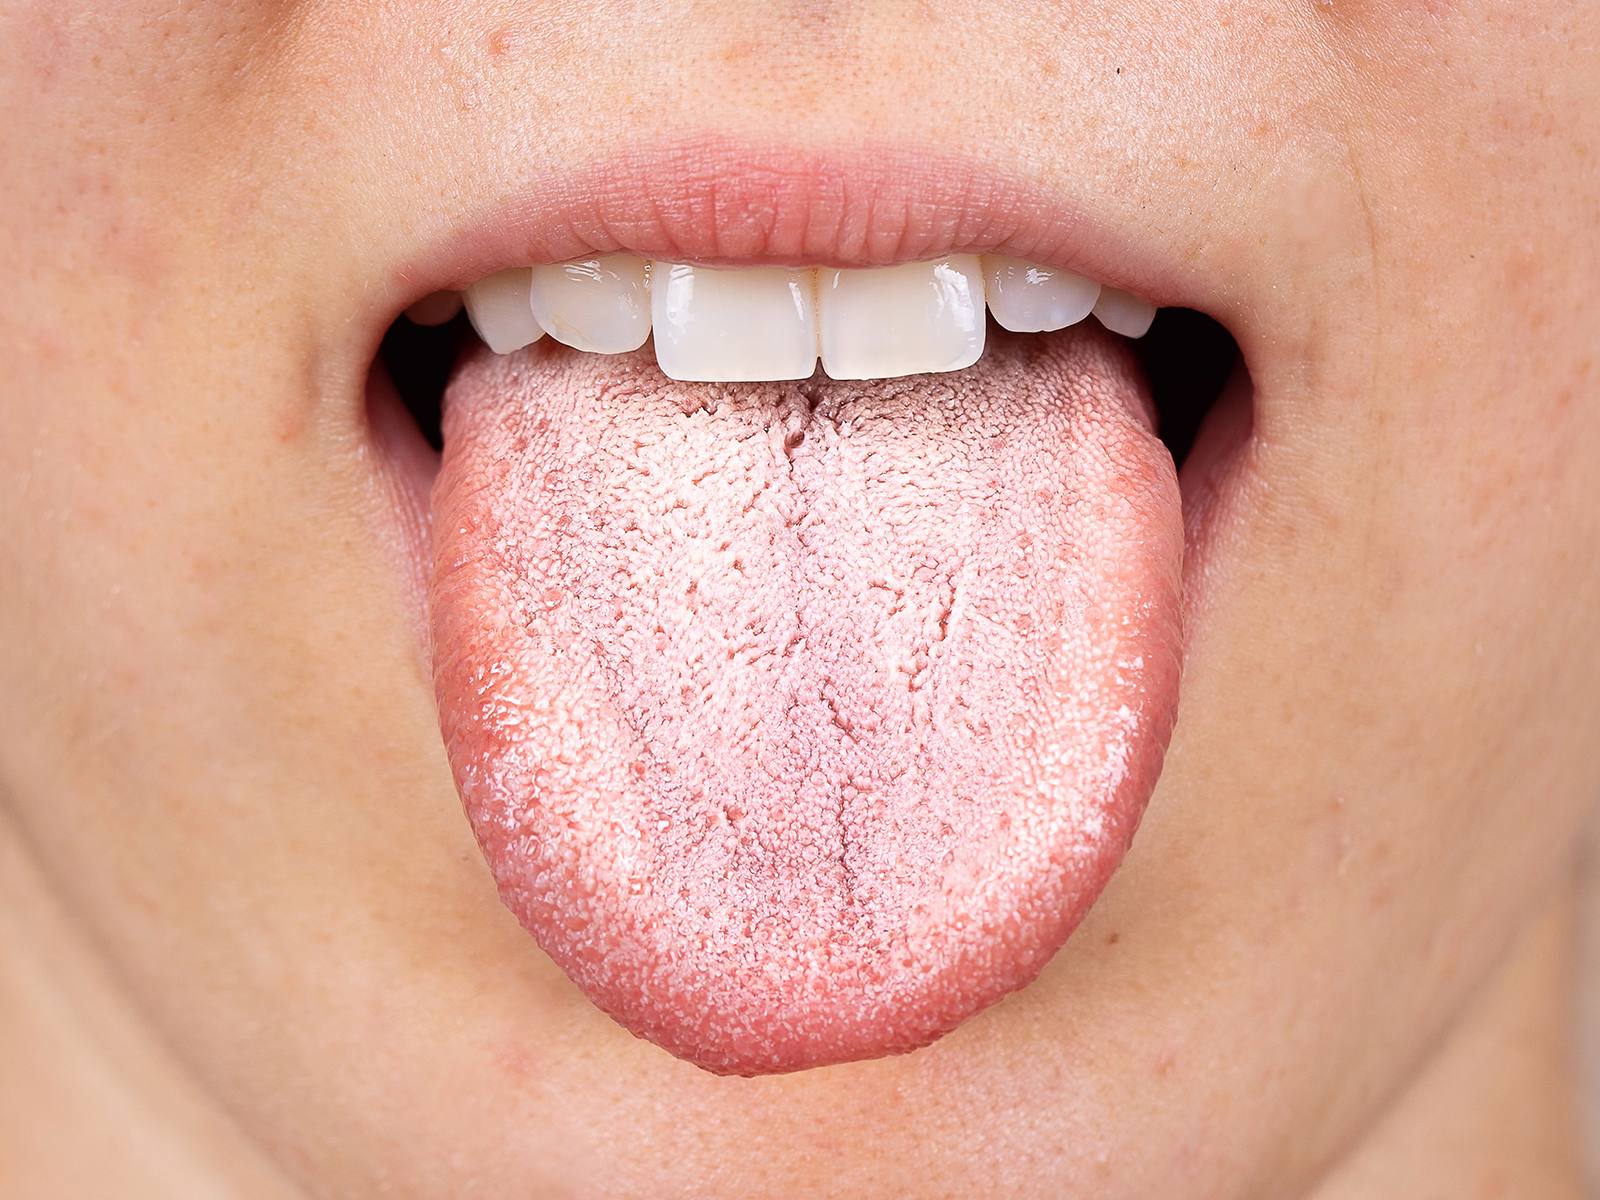 What Are Some Common Causes of Dry Mouth?